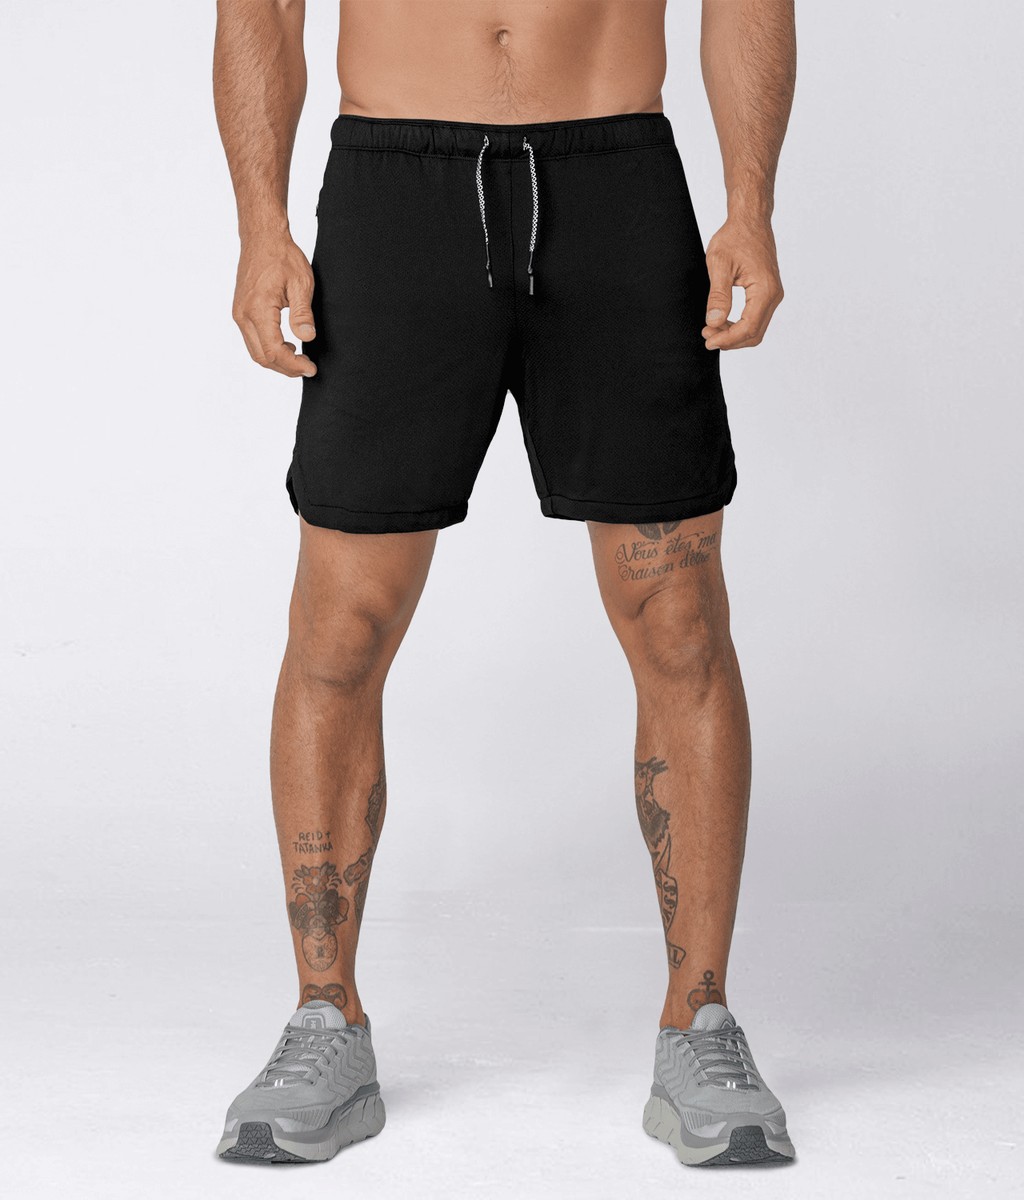 Air Pro™ 7 Ink Black 2 in 1 Men's Gym Workout Shorts with Liner - Born  Tough